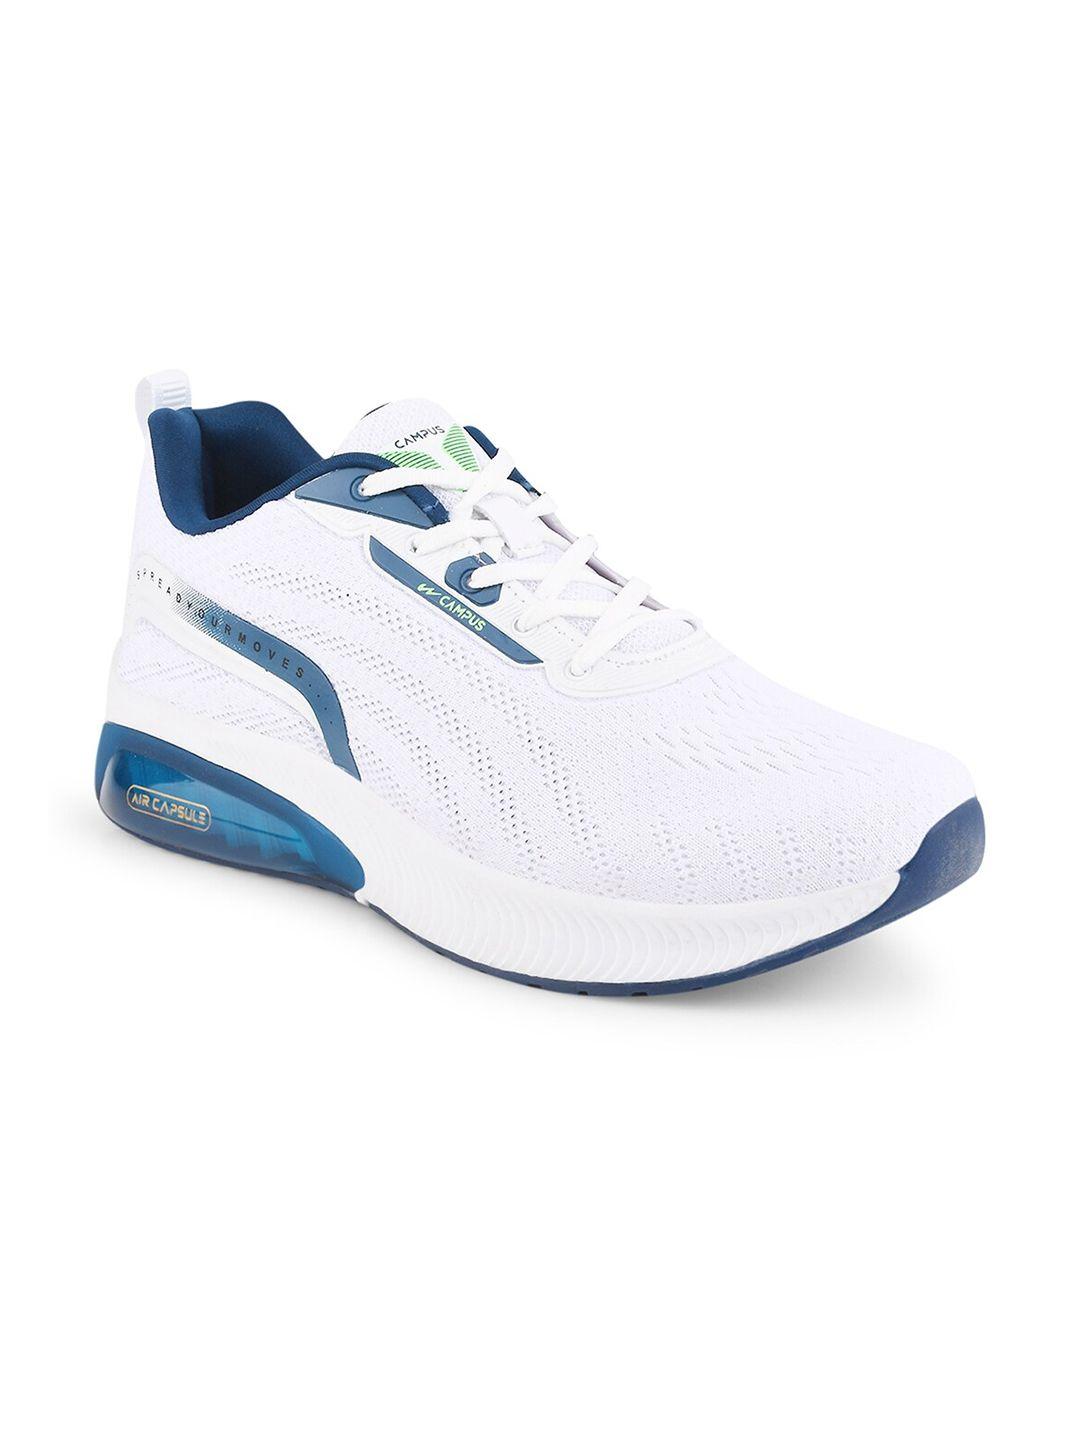 campus men boundary mesh non-marking running sports shoes